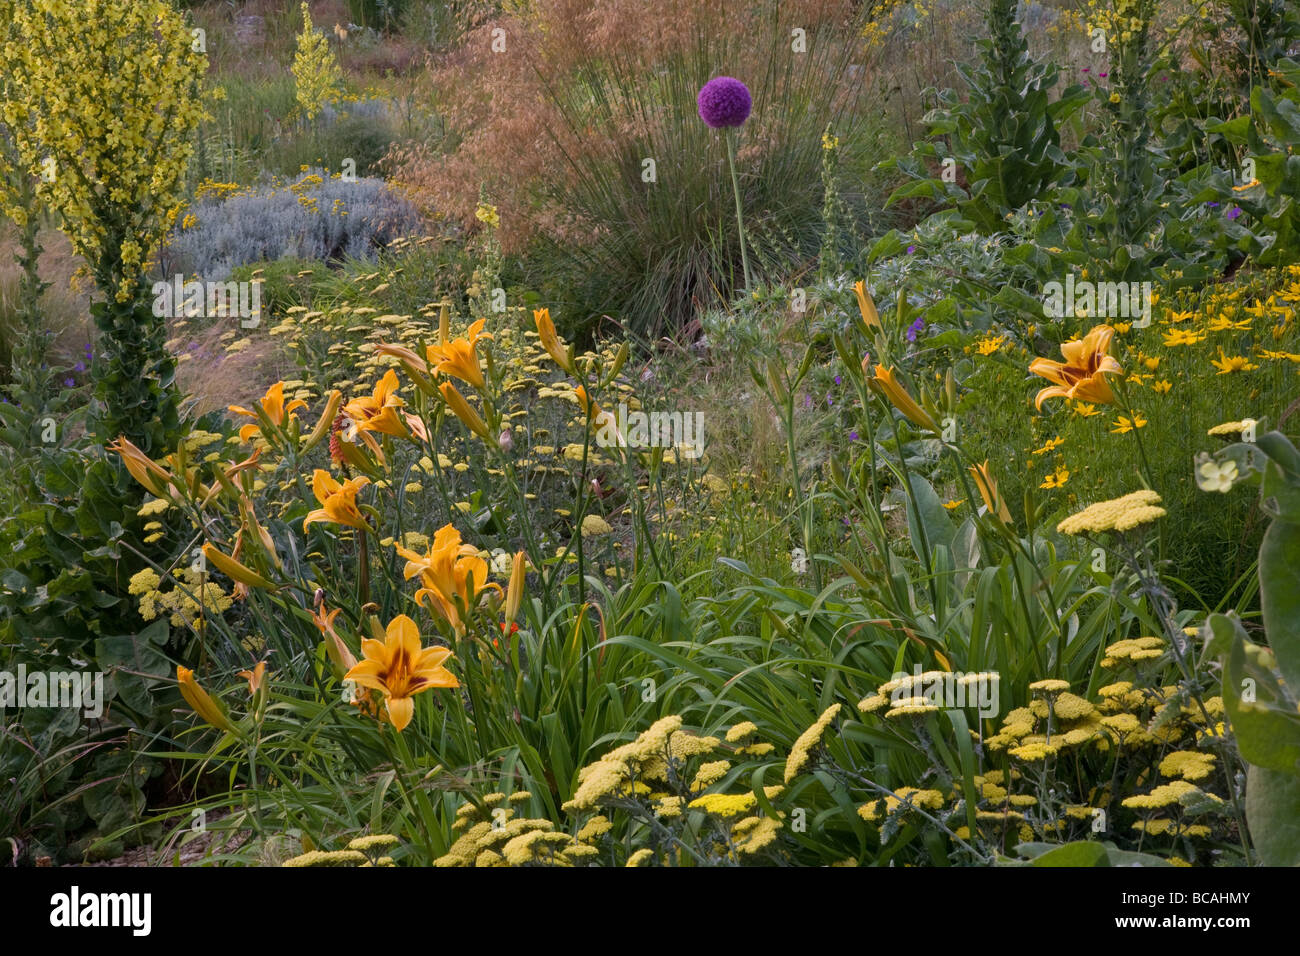 Prairie planting of perennials and grasses Stock Photo